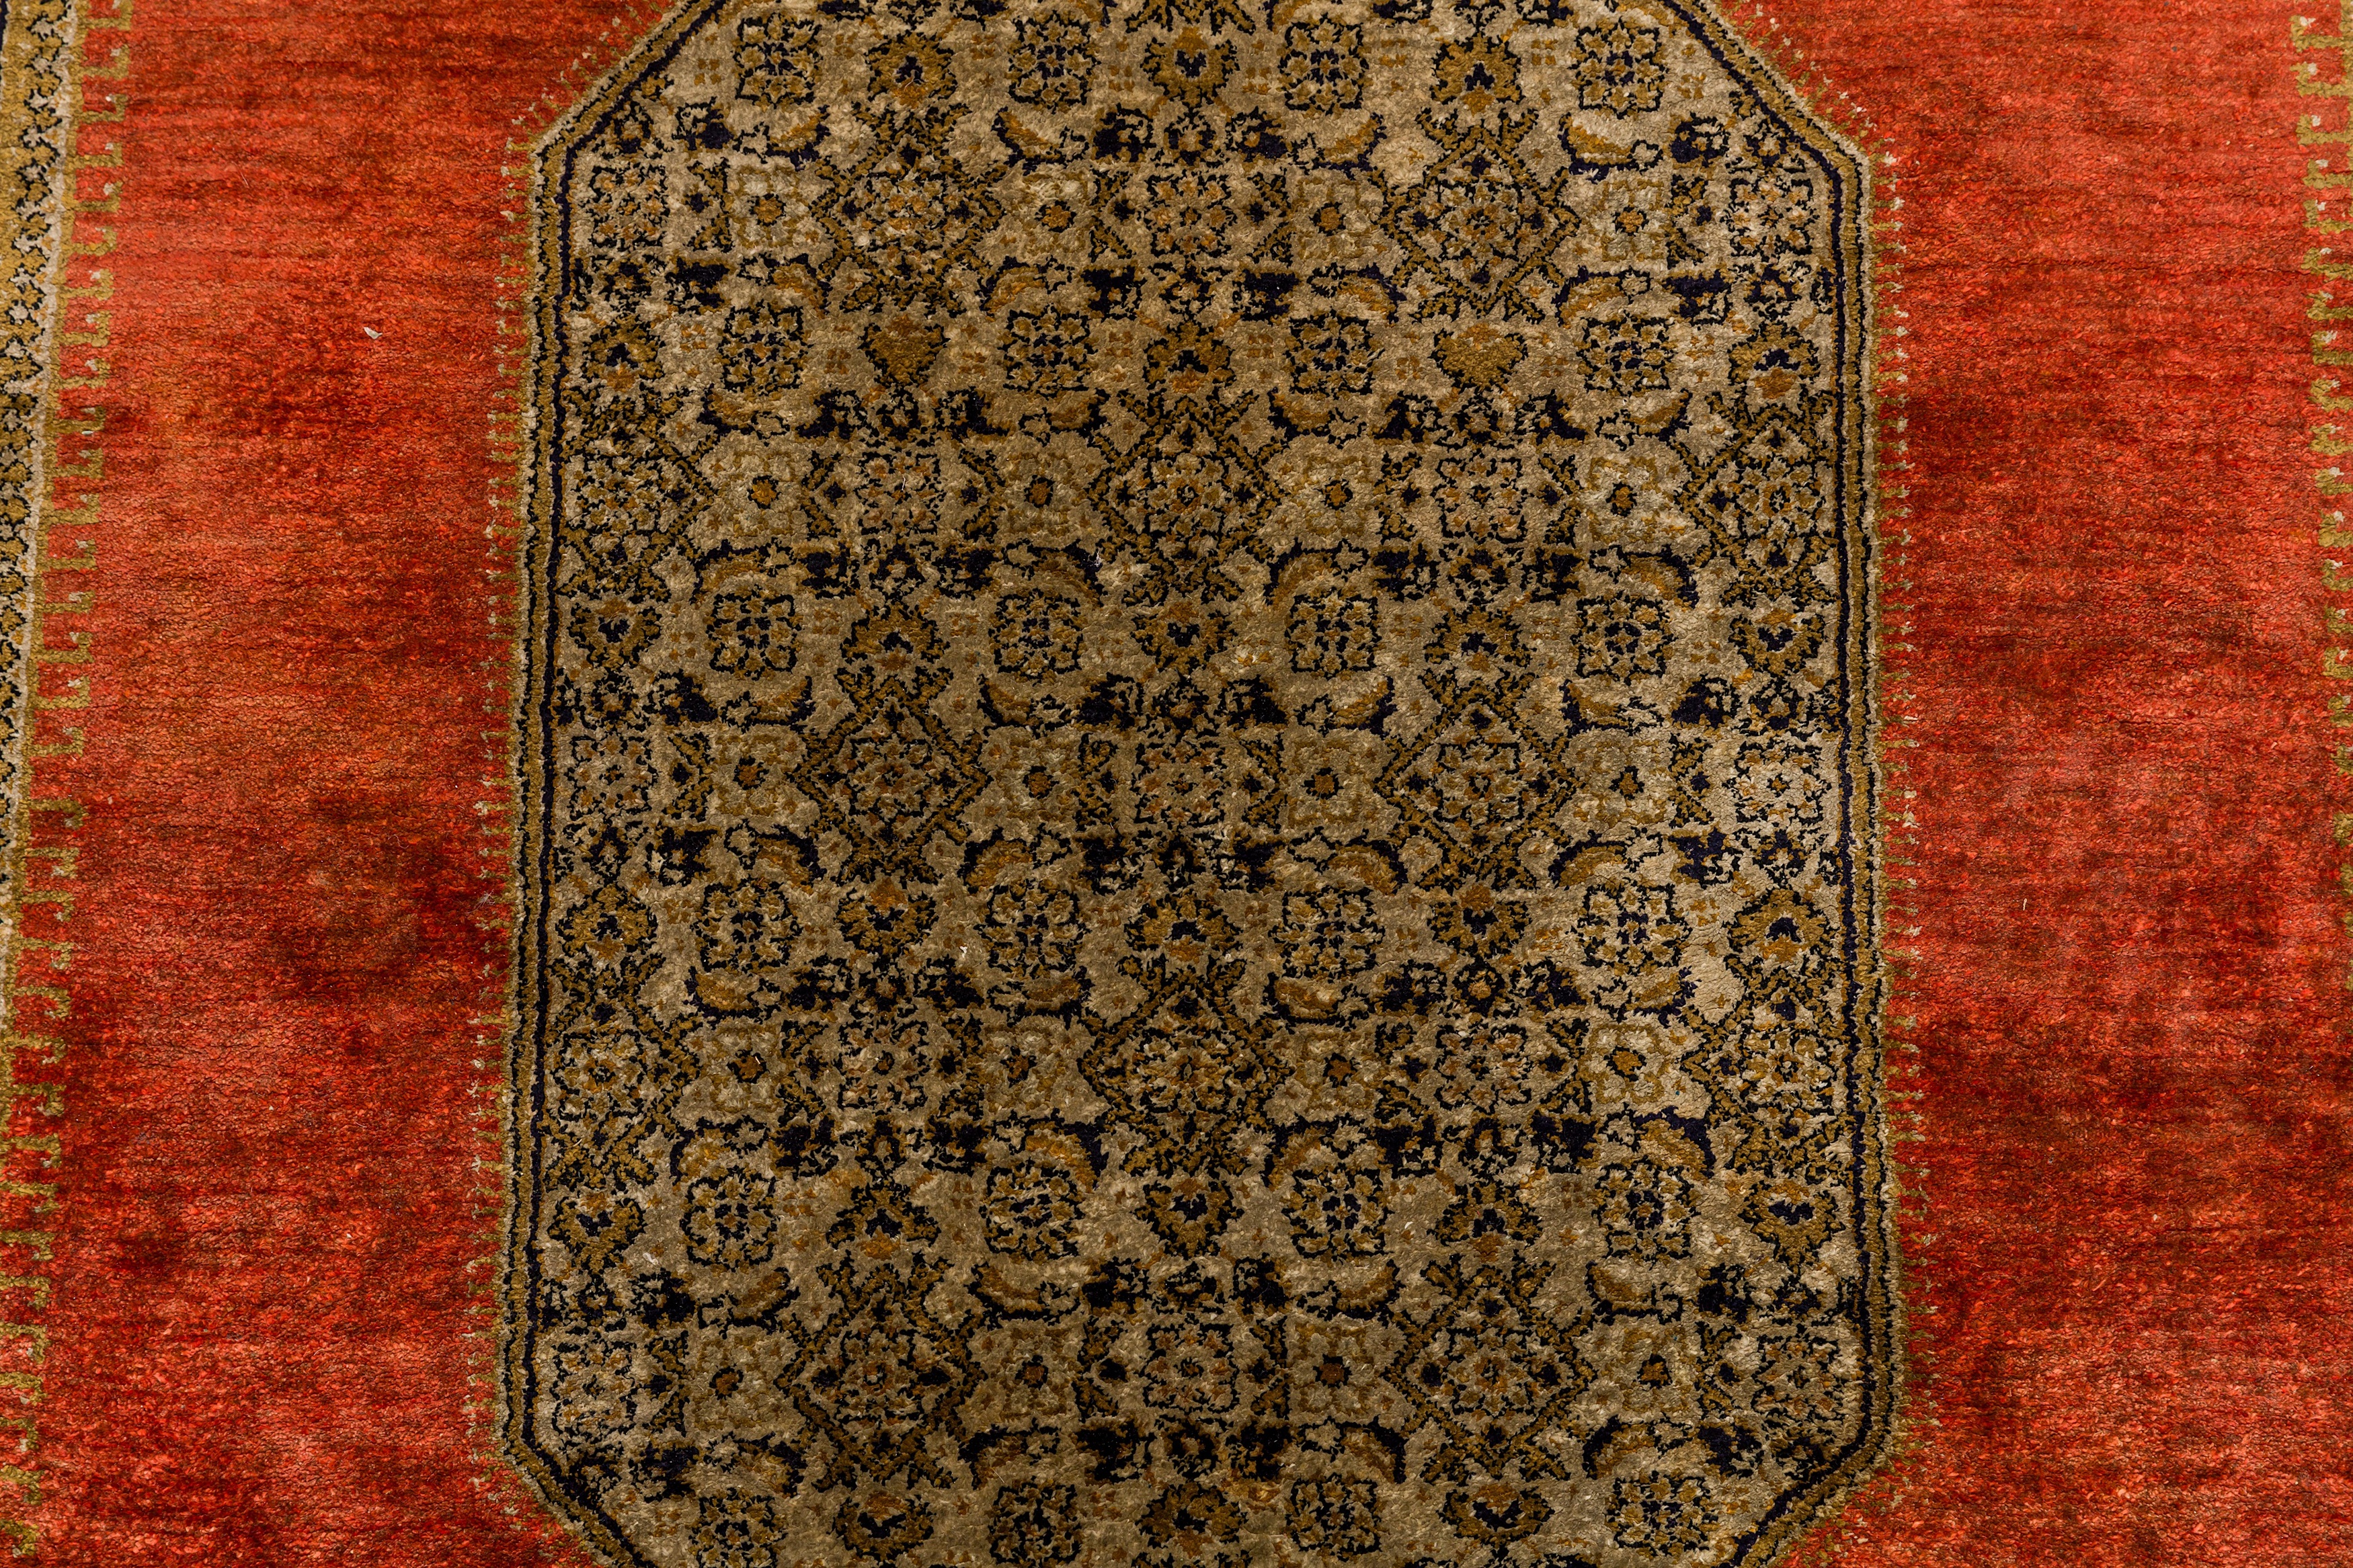 A VERY FINE SILK QUM RUG, CENTRAL PERSIA - Image 4 of 8